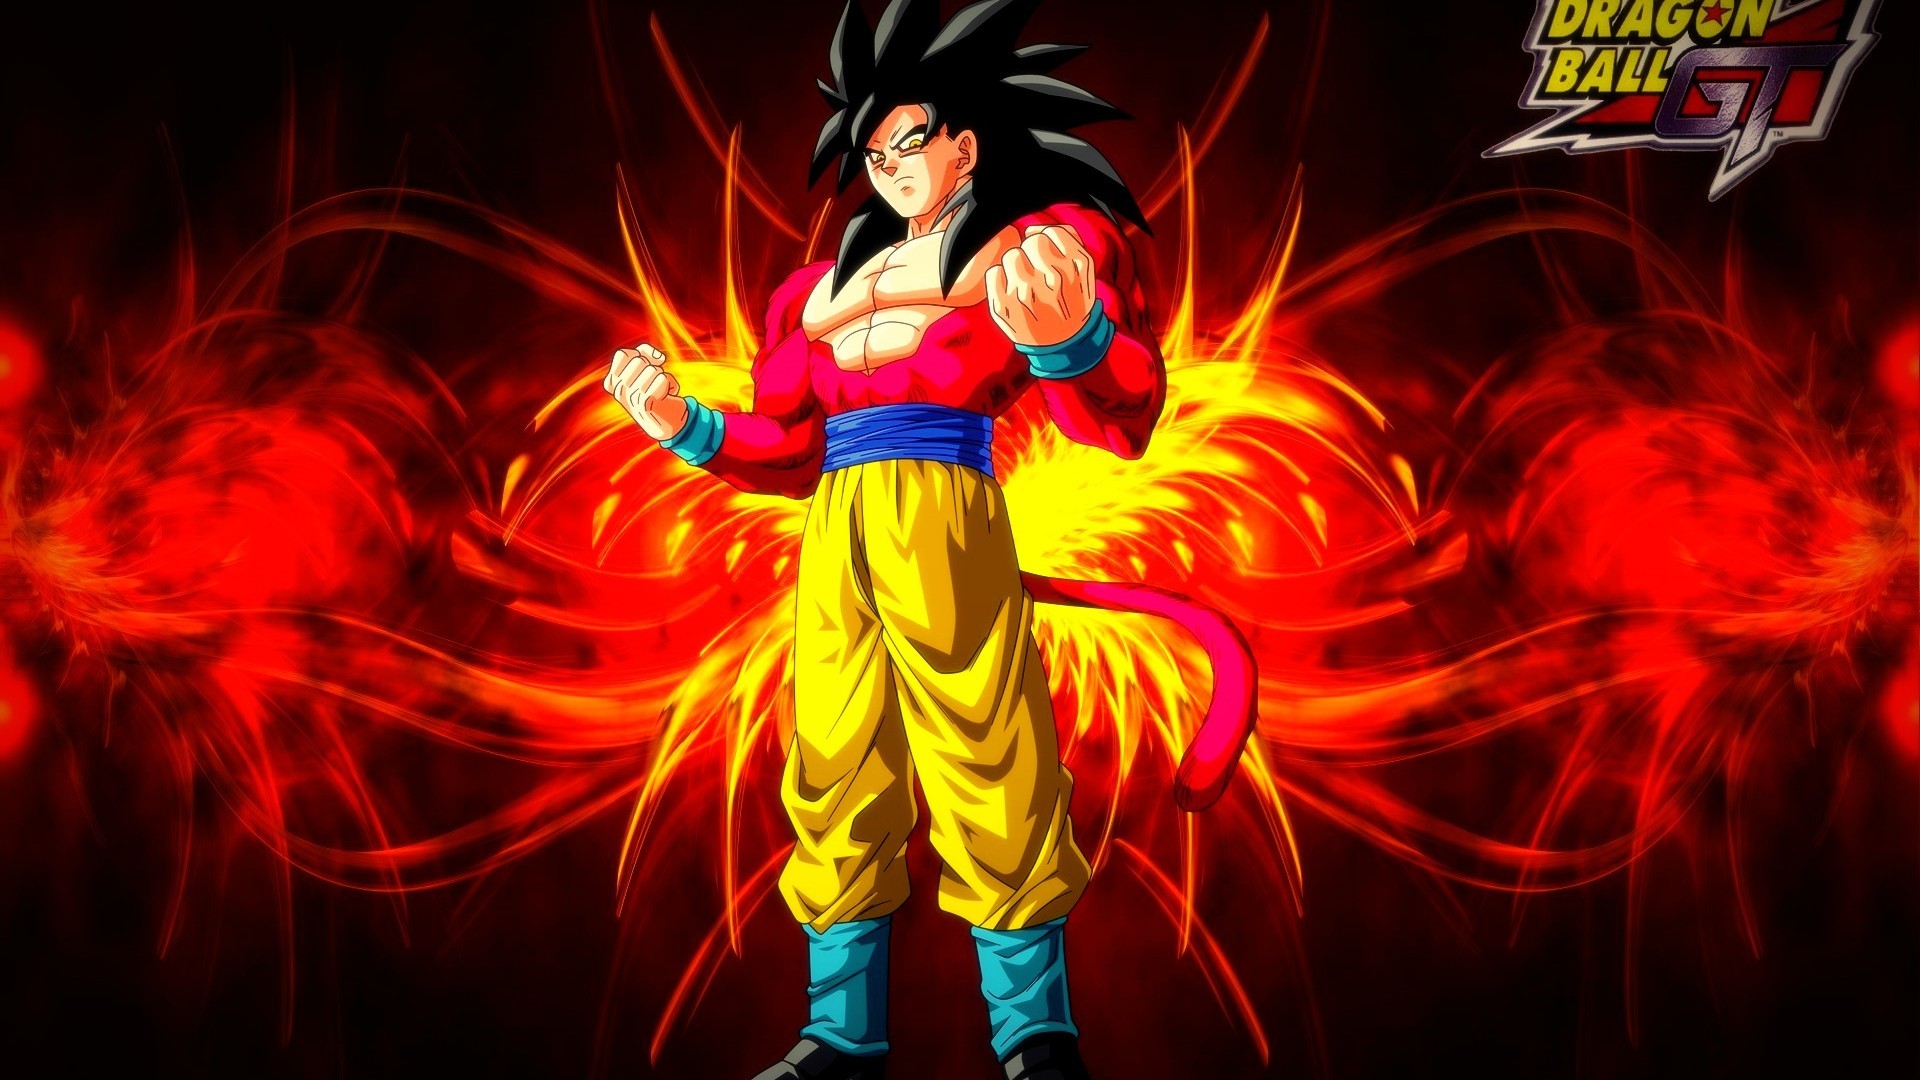 Goku SSJ4 Wallpaper with image resolution 1920x1080 pixel. You can use this wallpaper as background for your desktop Computer Screensavers, Android or iPhone smartphones